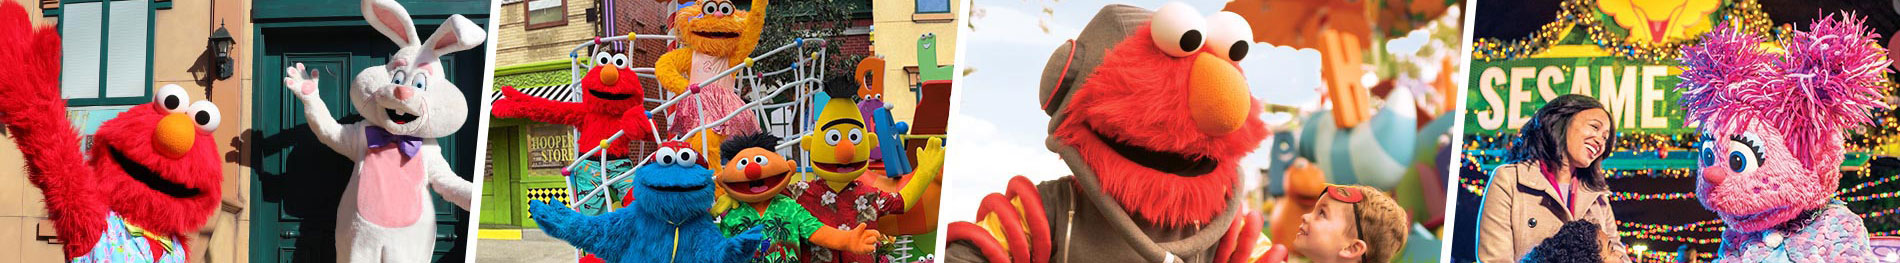 Seasonal events at Sesame Place San Diego